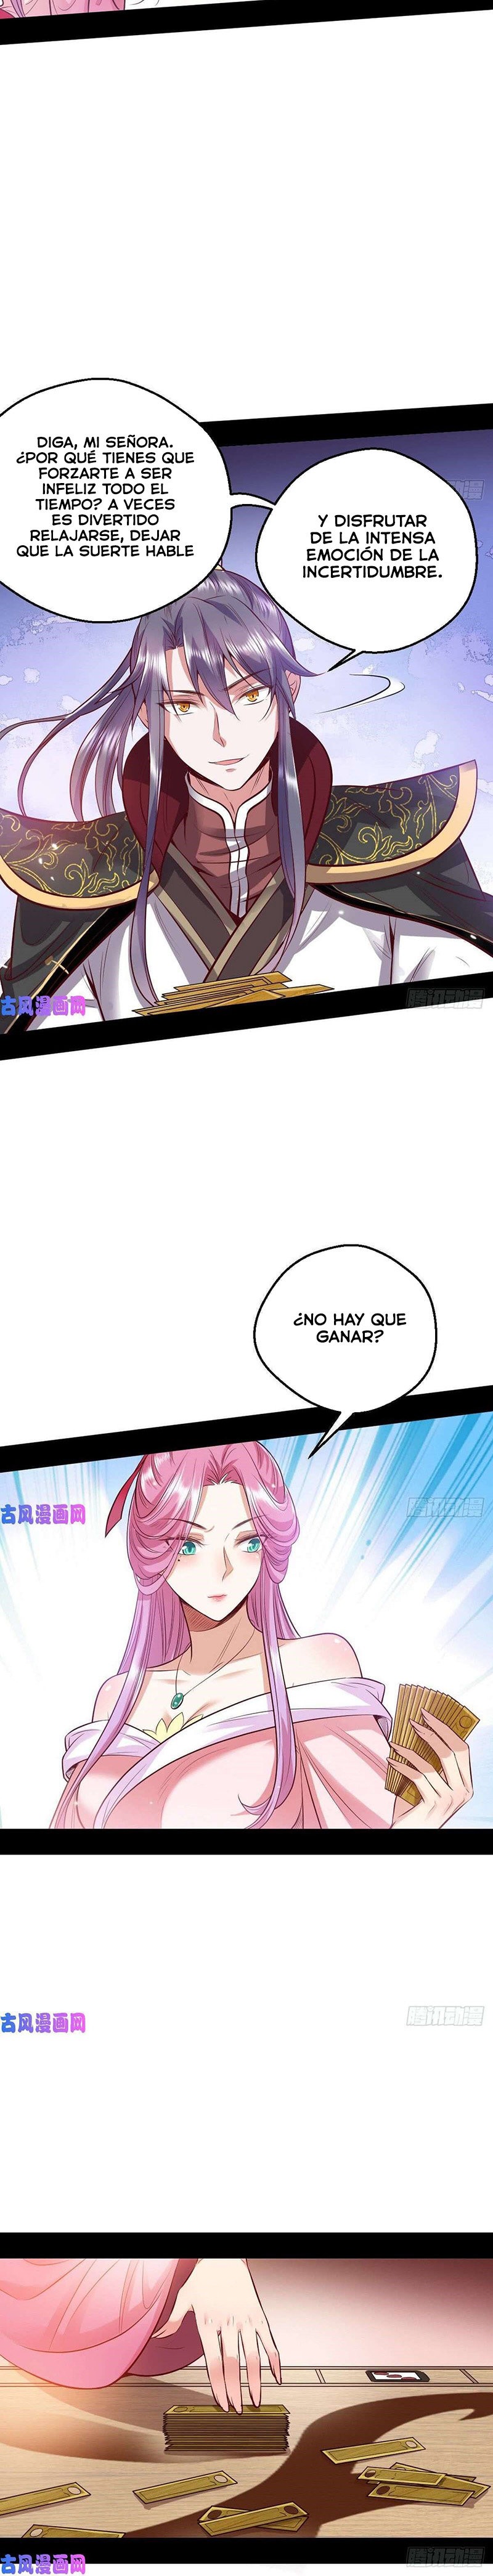 Manga Soy un dios maligno Chapter 41 image number 2